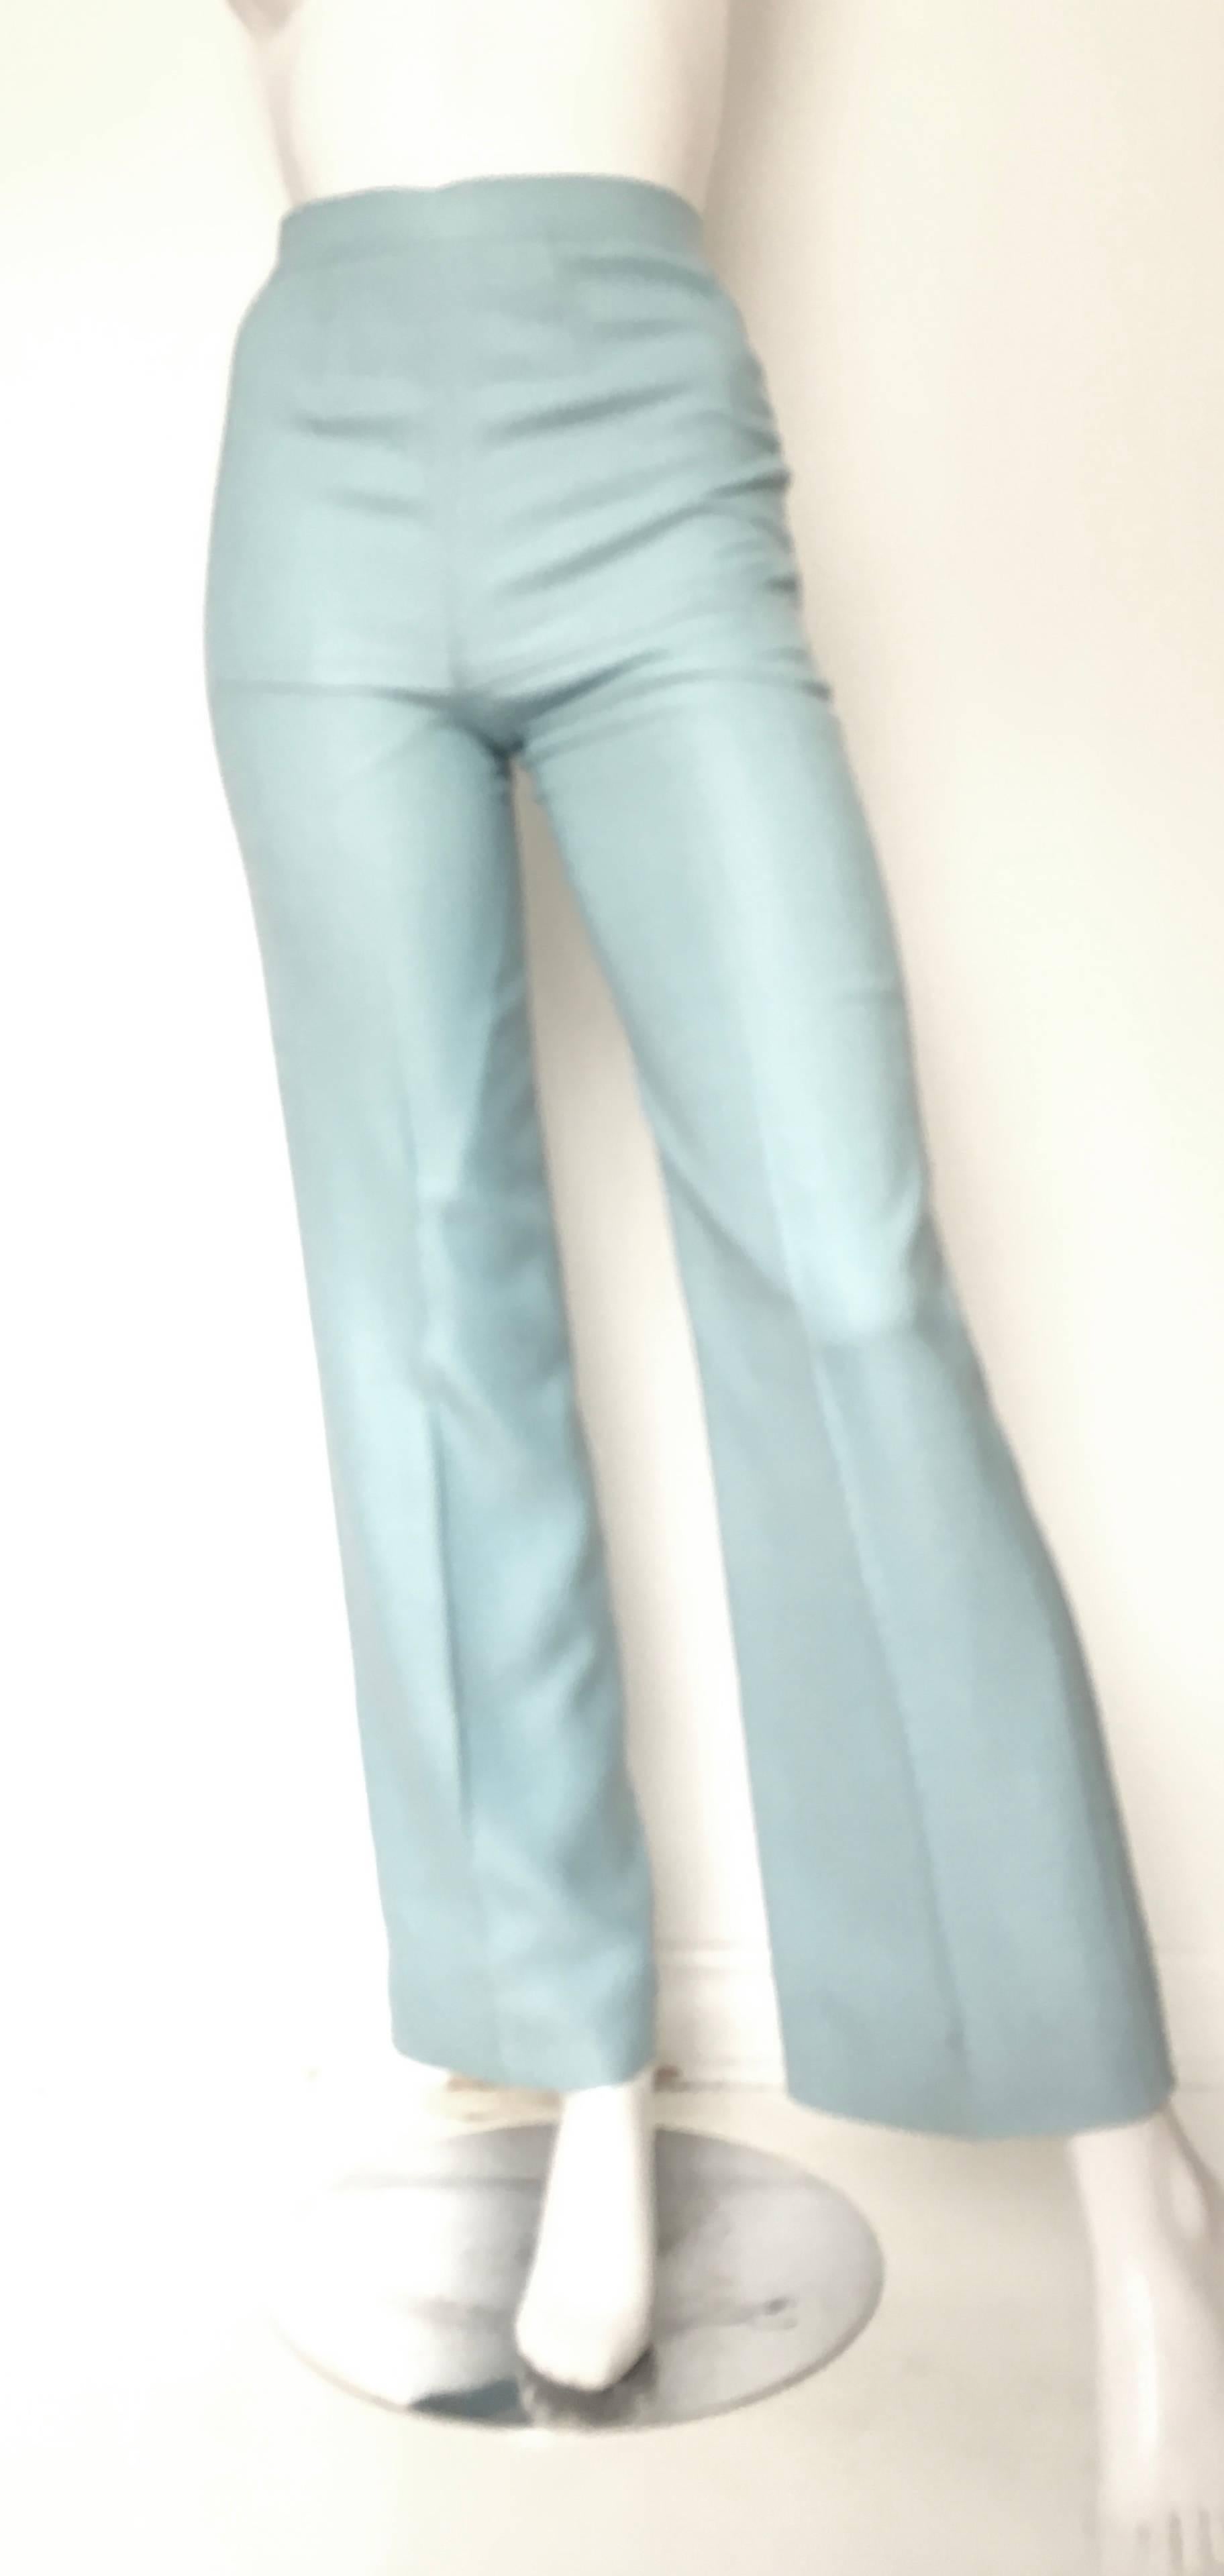 Courreges Paris 1970s stunning aqua pants is an USA size x-small.  Ladies please grab your trusted tape measure so you can properly measure your waistline & inseam to make certain these gorgeous pants will fit you to perfection.  Texture wise these